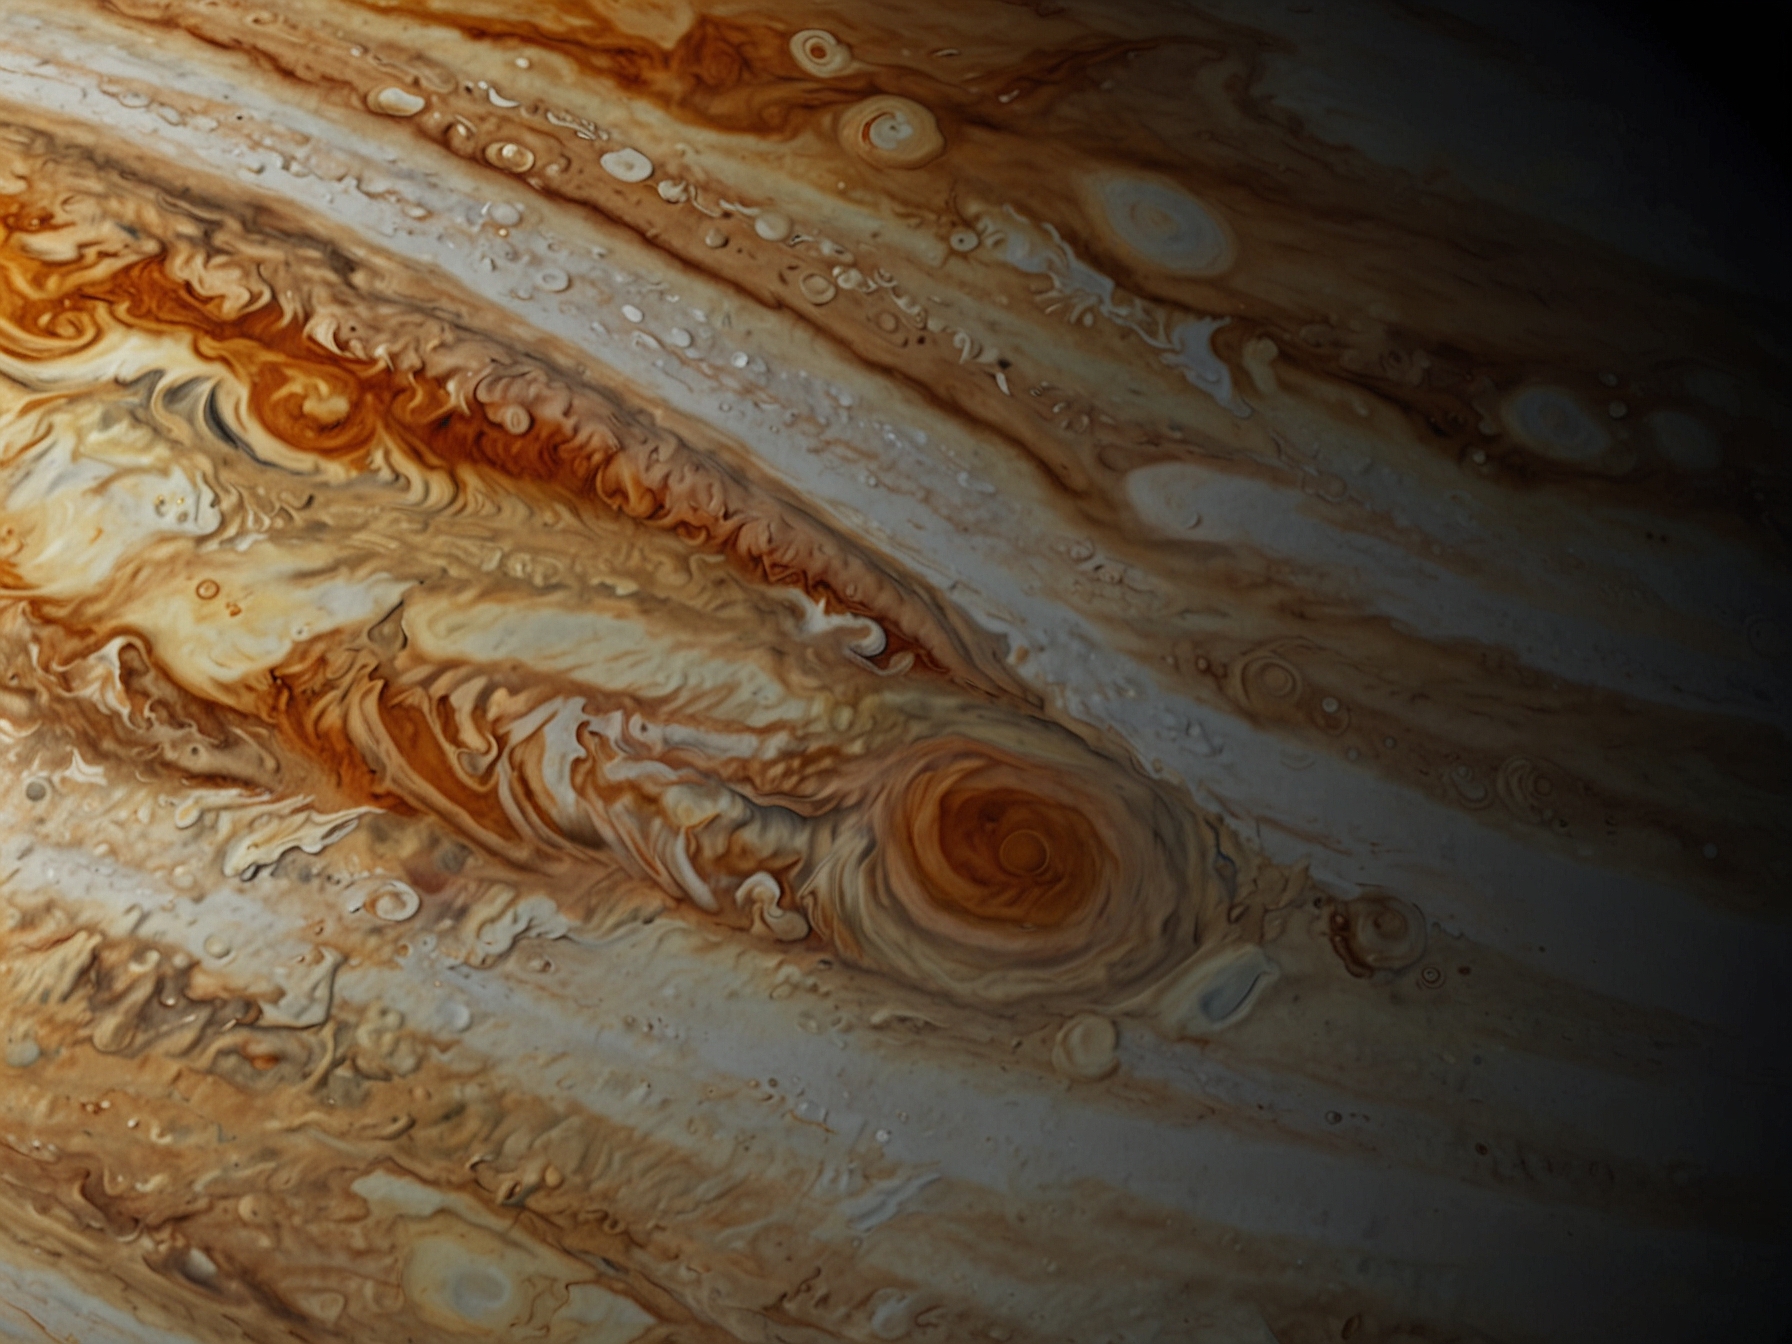 An illustration of Jupiter showcasing the Great Red Spot. This massive, reddish storm appears prominently, highlighting its counter-clockwise rotation and significant size compared to the planet.